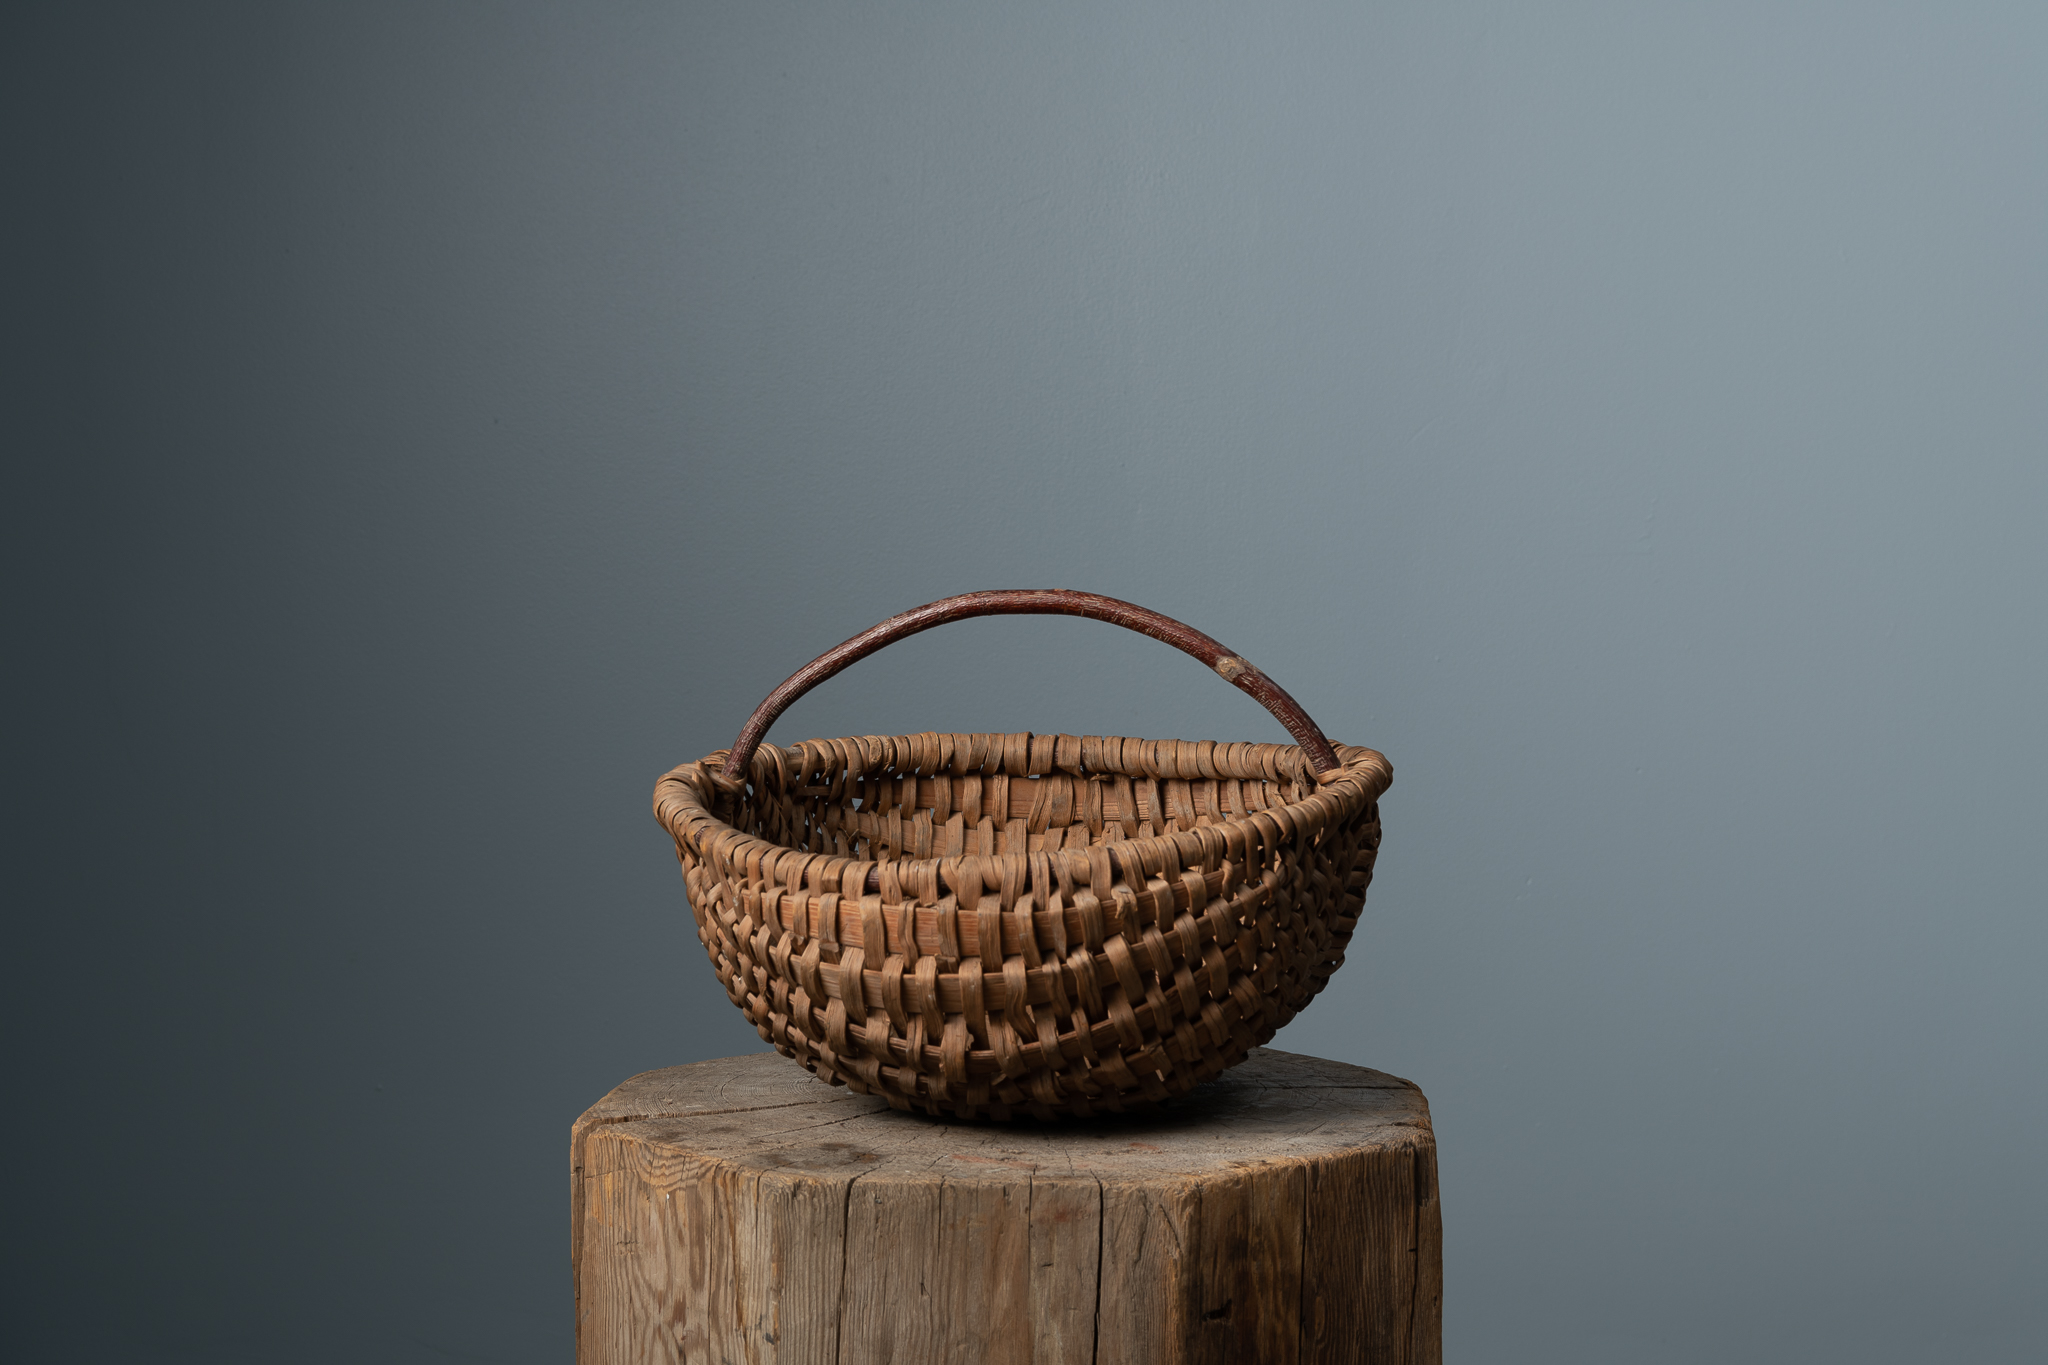 Folk art woven basket from northern Sweden made during the 19th century. The basket is woven completely by hand and has a simple handle